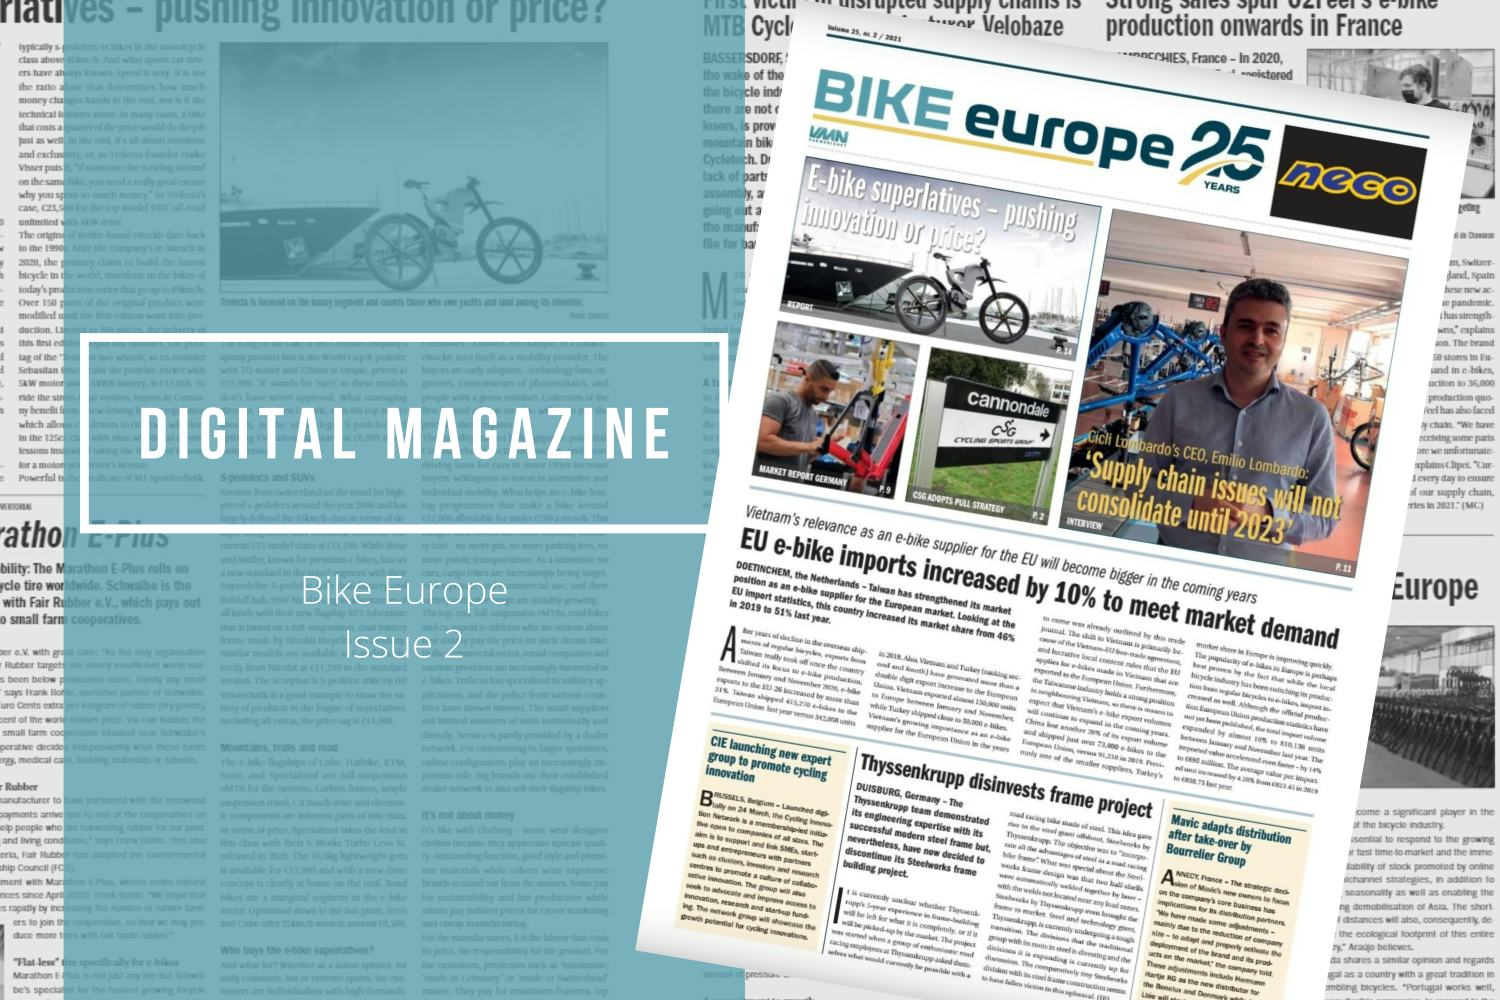 Latest Bike Europe edition now online